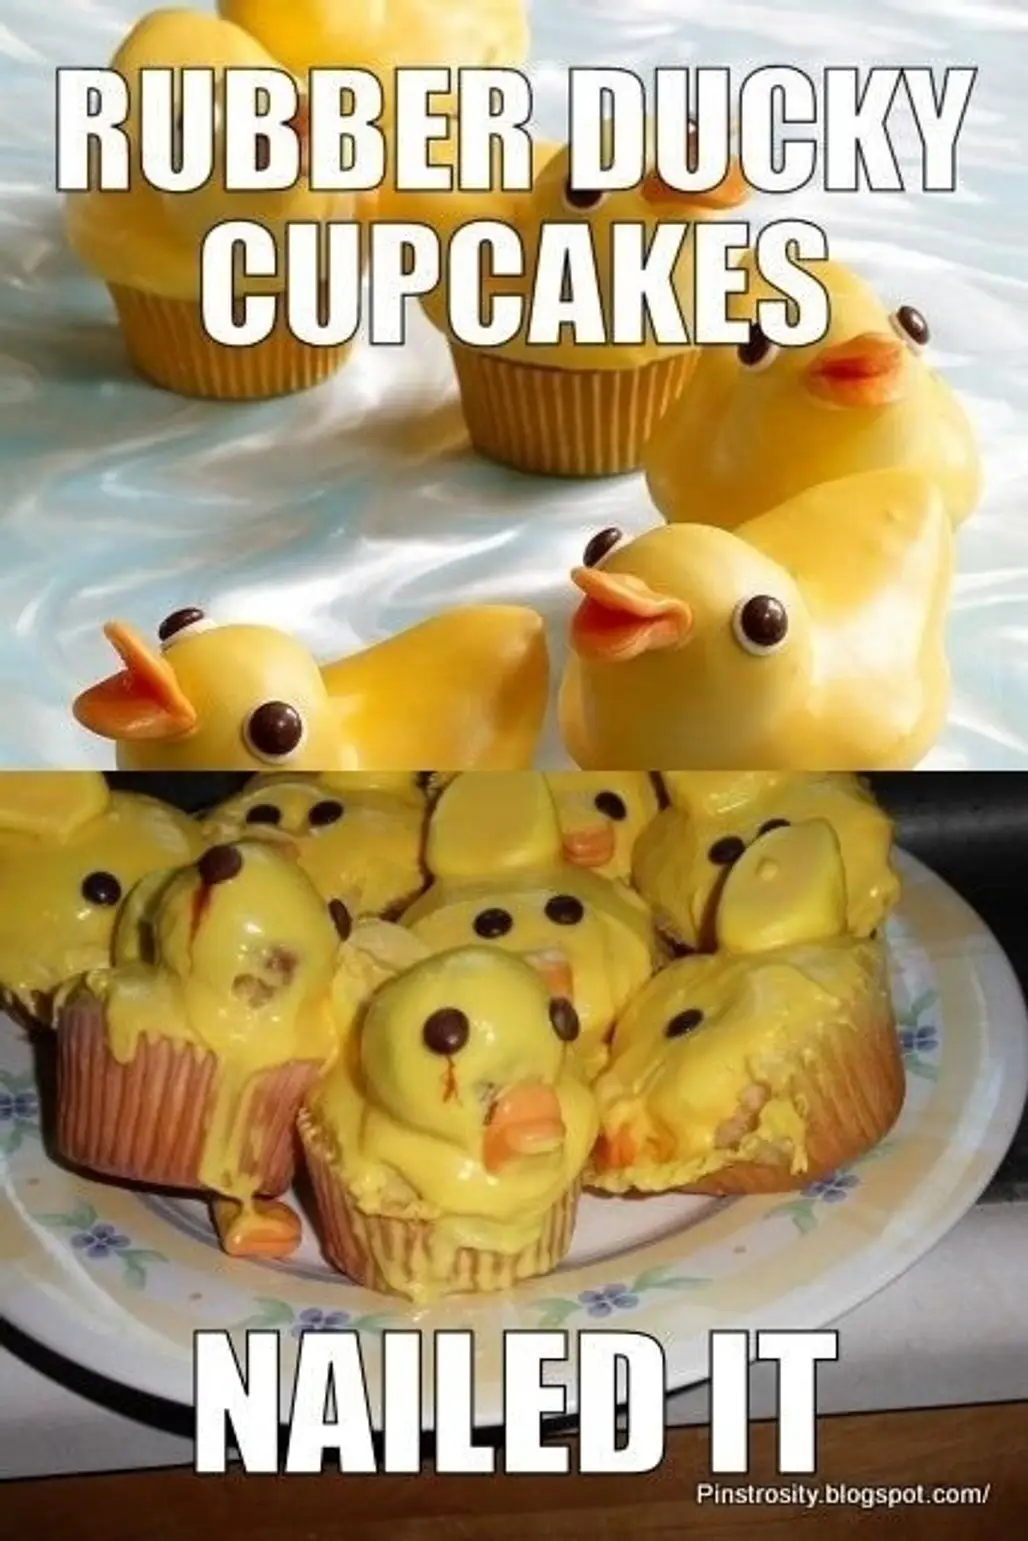 Rubber Ducky Cakes